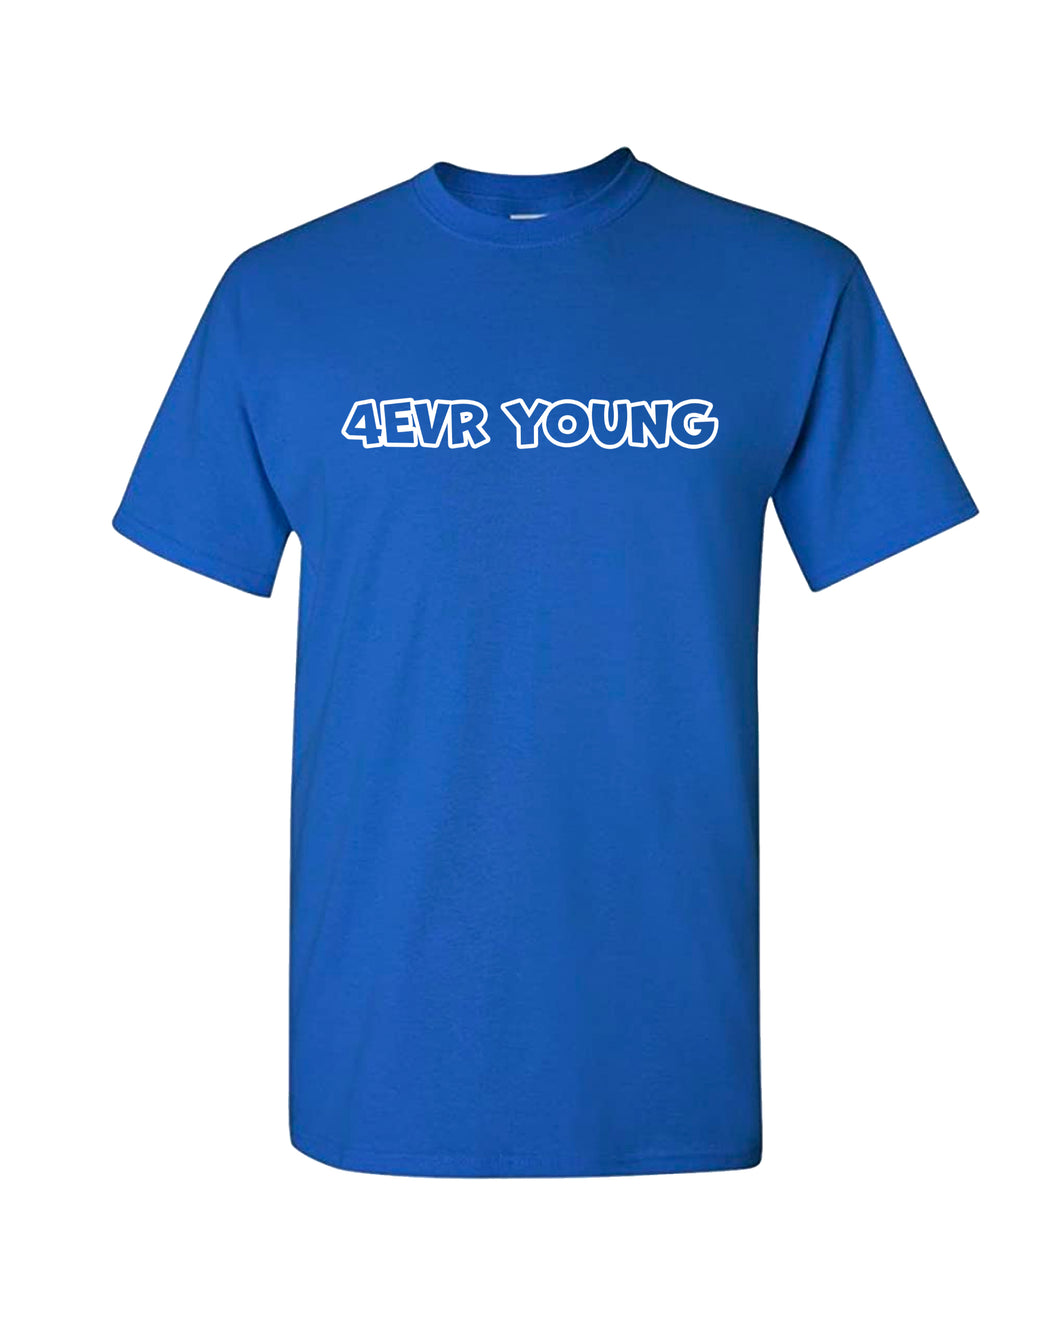 4EVR YOUNG Fun Royal Blue Tee